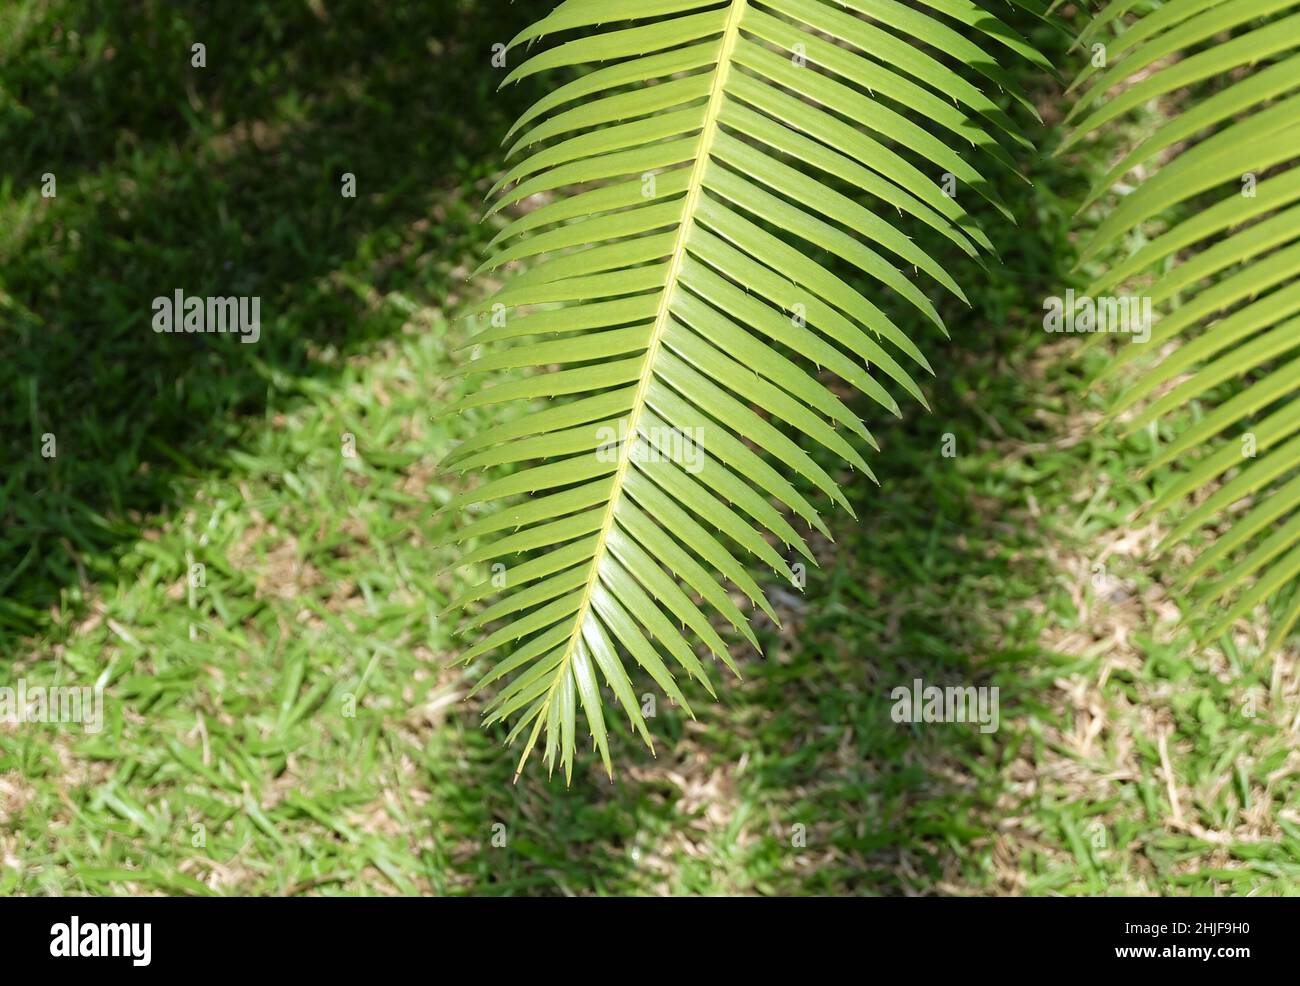 Garden and Plant, Dioon Edule Plants or Chestnut Dioon Palm Decoration in The Beautiful Garden. A Succulent Plants with Thick and Fleshy Leaves with S Stock Photo